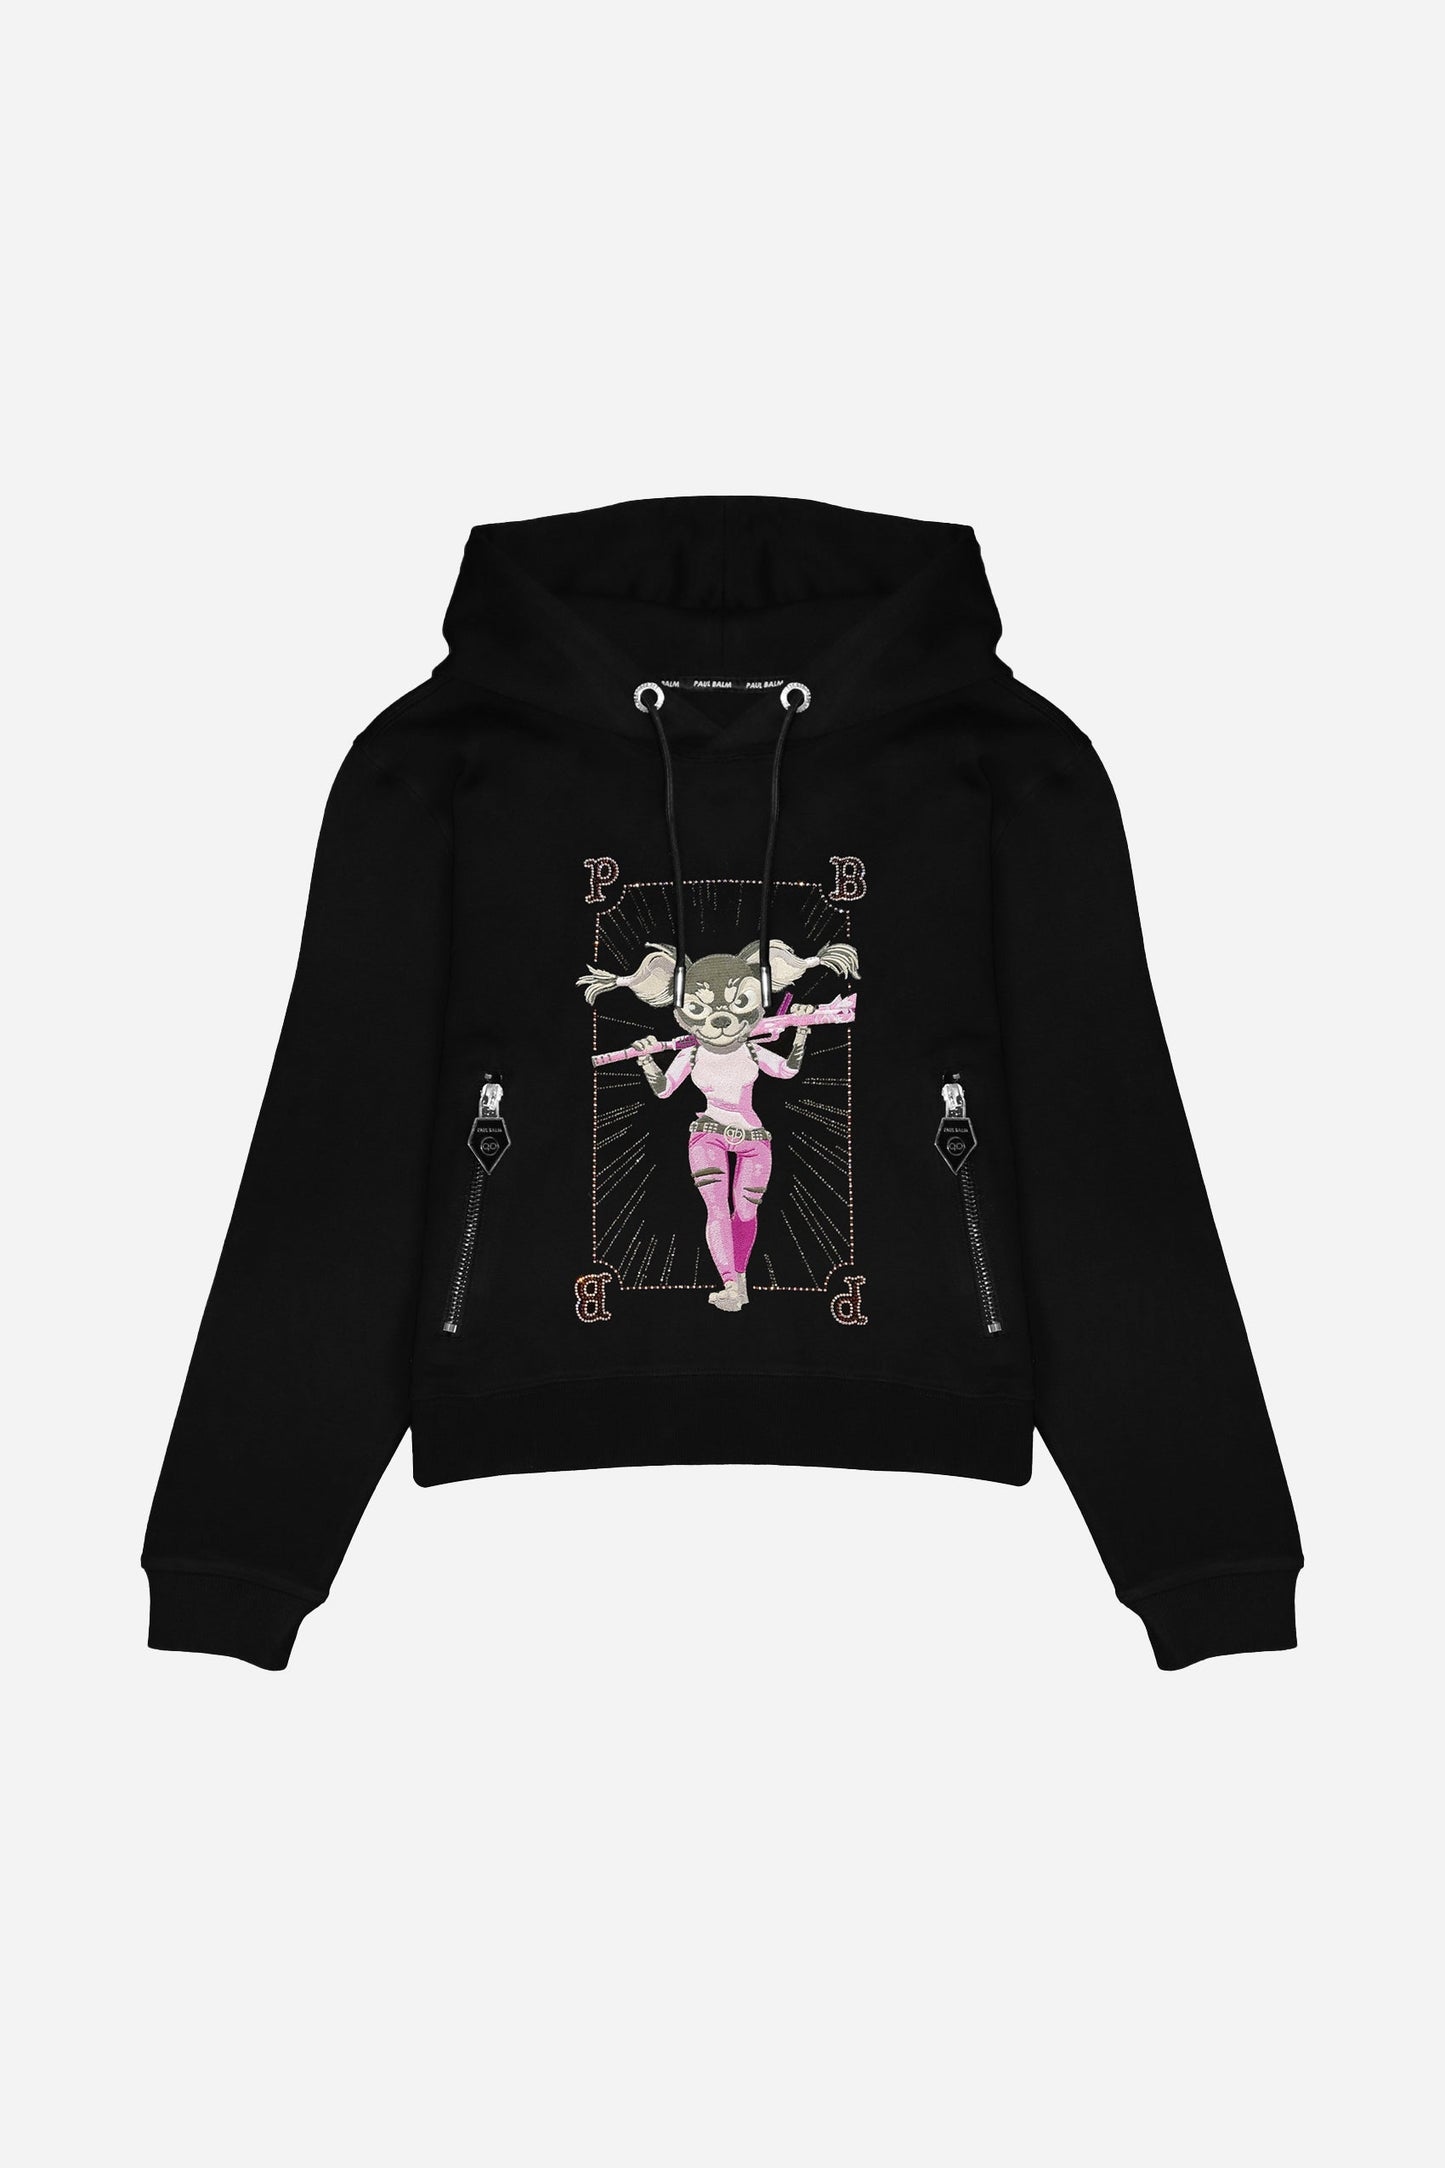 Elly Embroidery Hoodie - Limited to 300